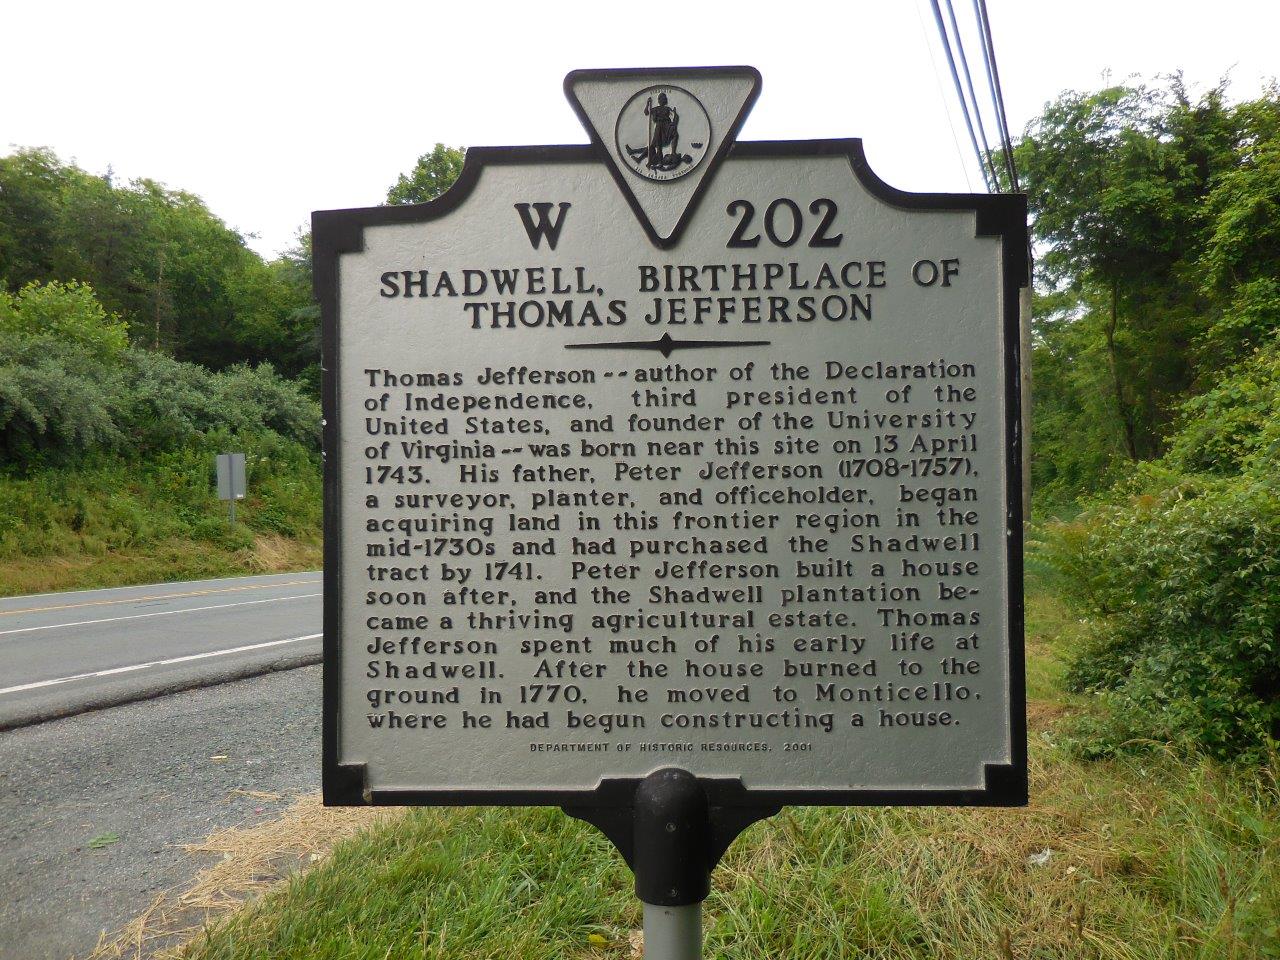 House in which Thomas Jefferson was born